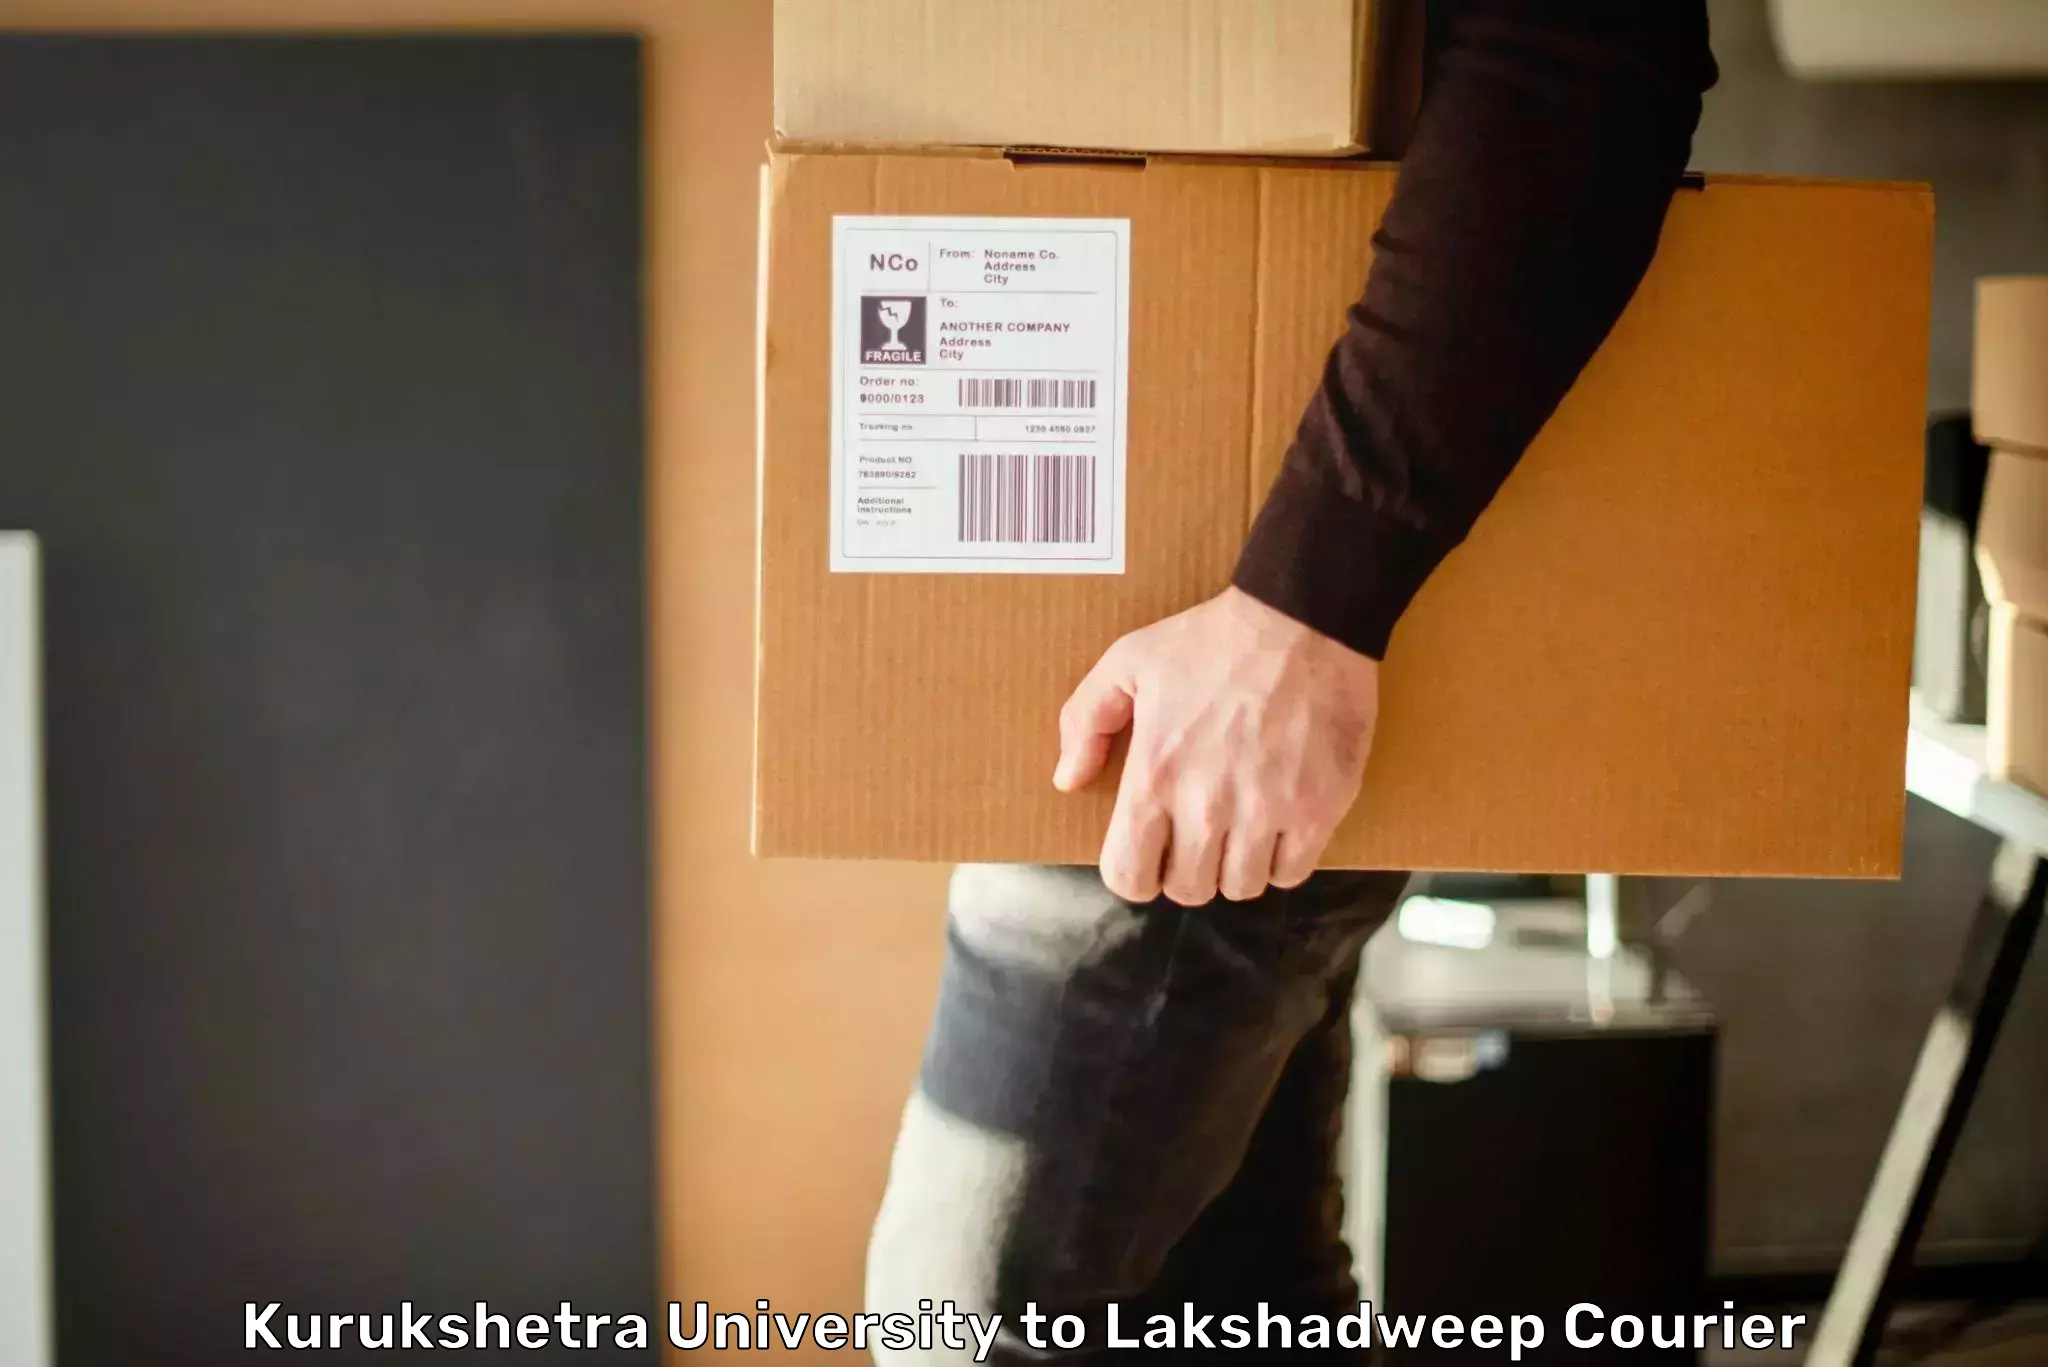 End-to-end delivery in Kurukshetra University to Lakshadweep